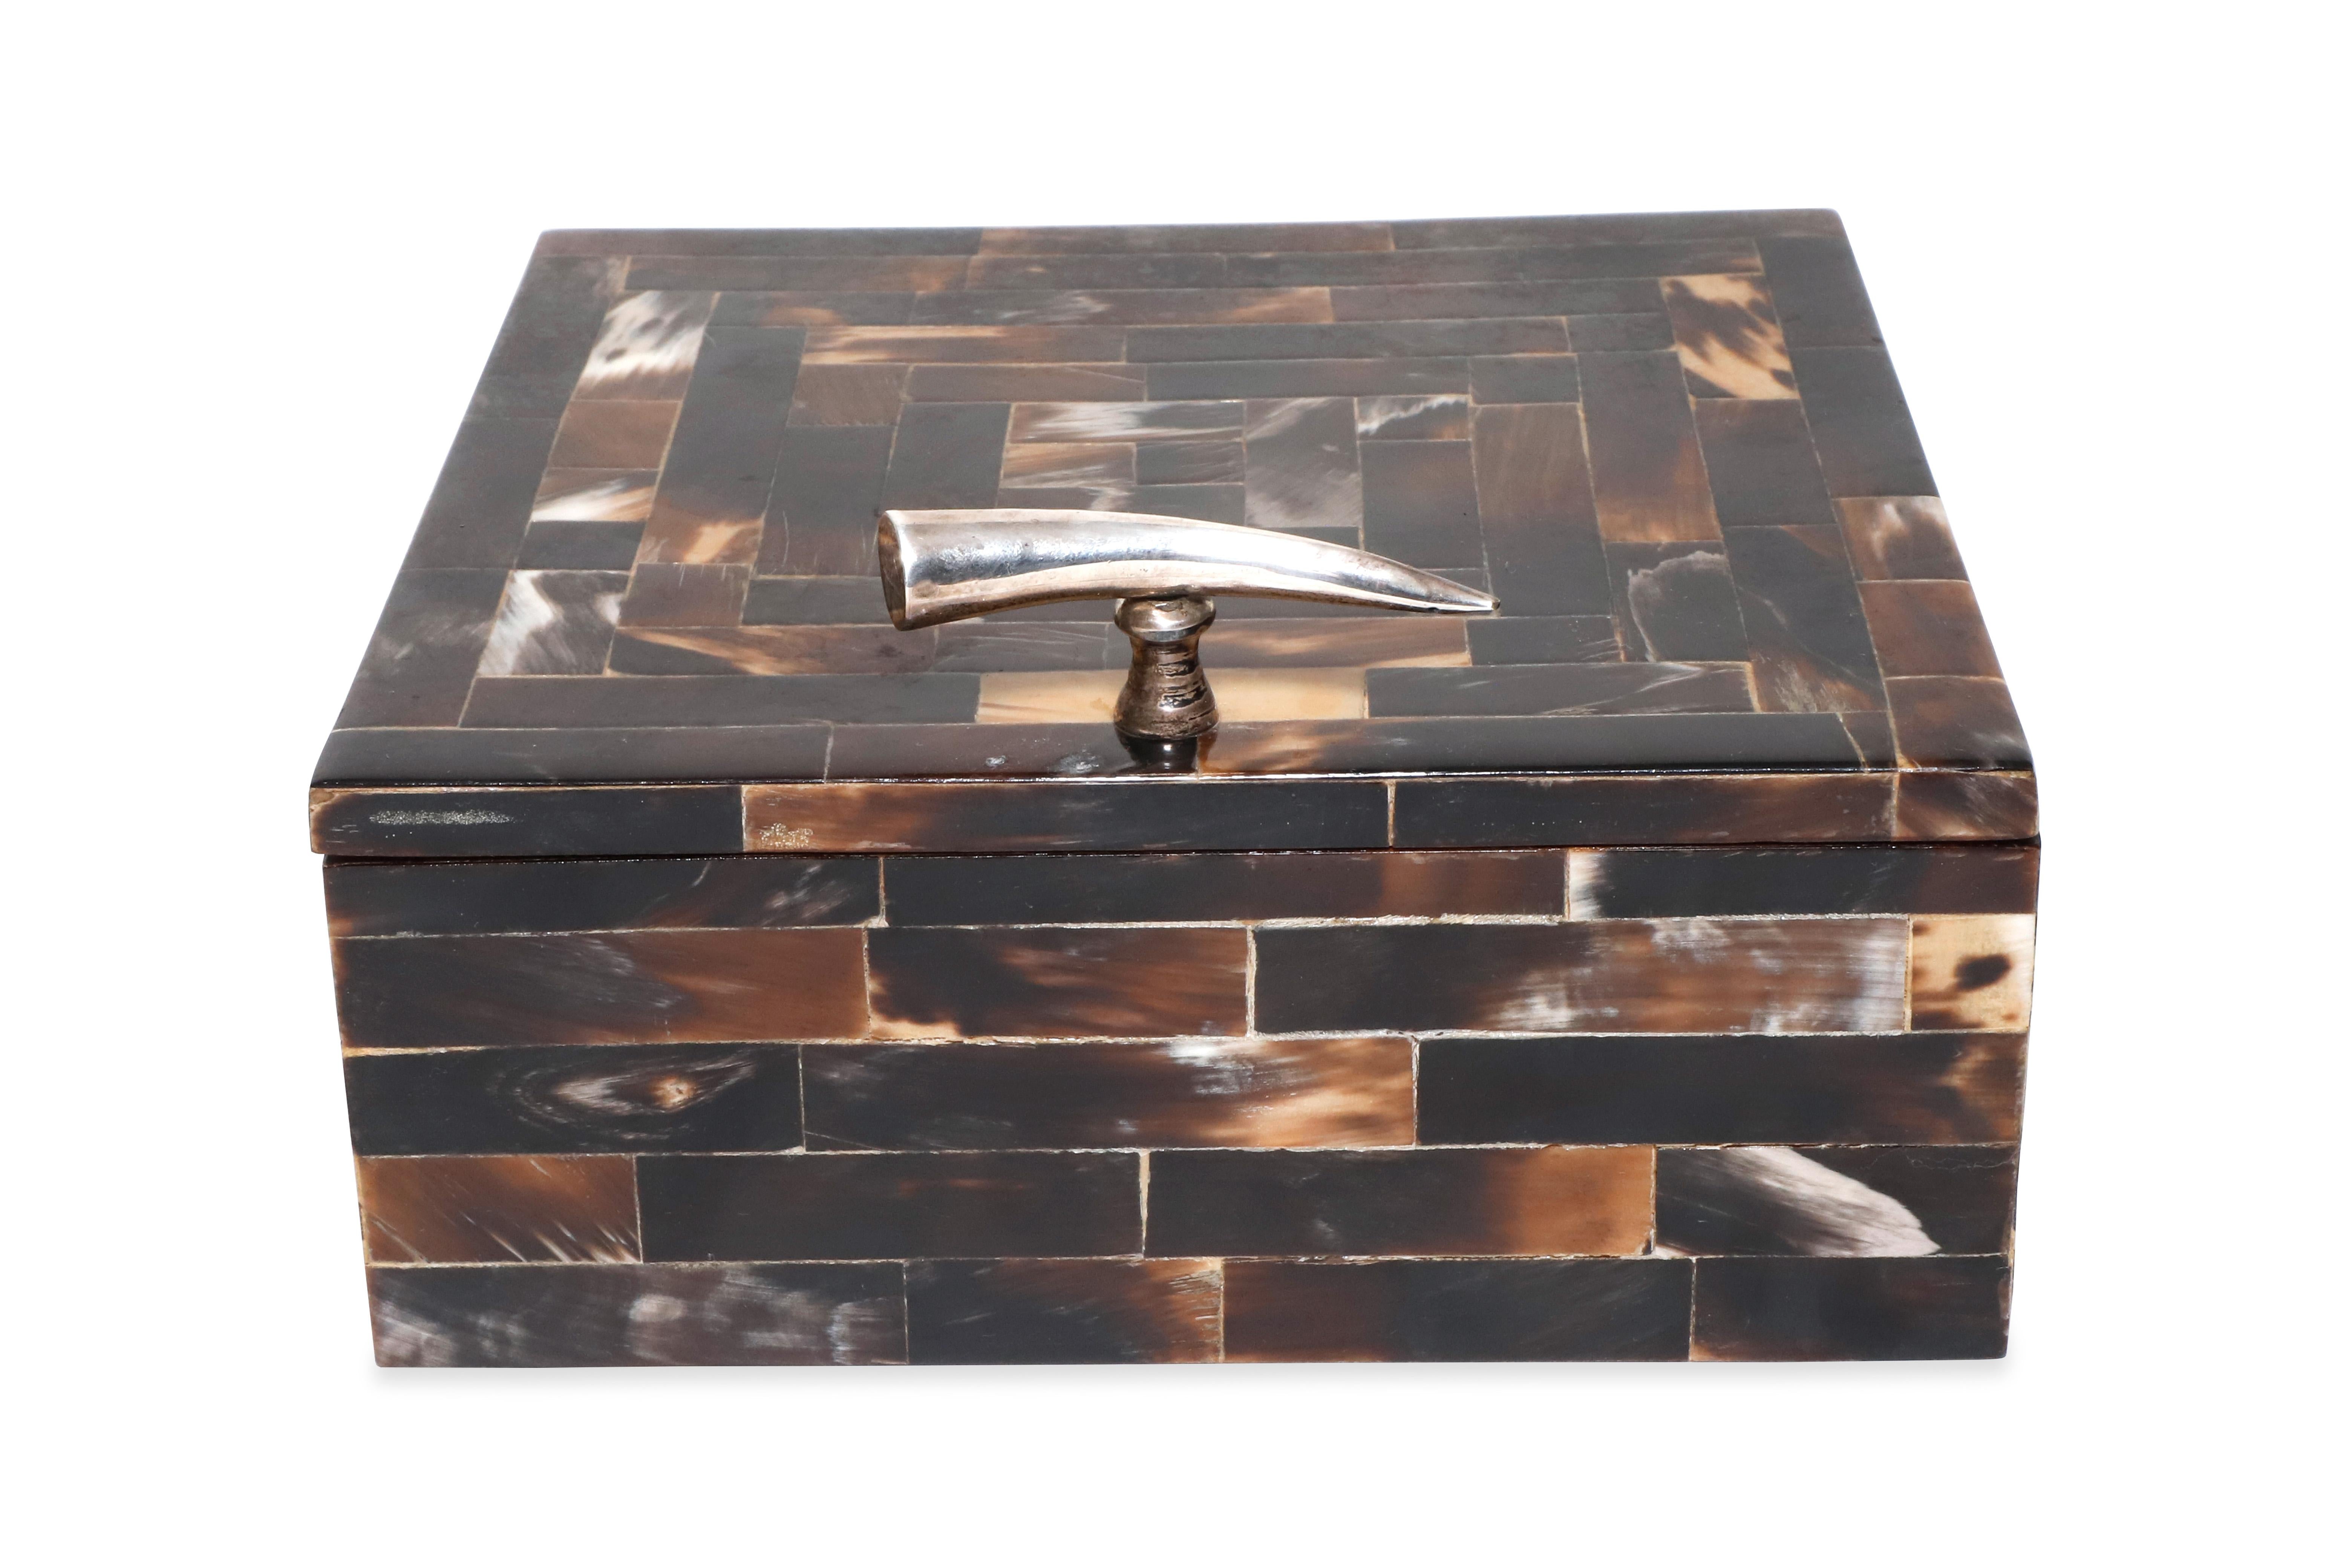 Square decorative box made out of Horn with a steel Horn handle. Interior made of wood with square comparments. 

Property from esteemed interior designer Juan Montoya. Juan Montoya is one of the most acclaimed and prolific interior designers in